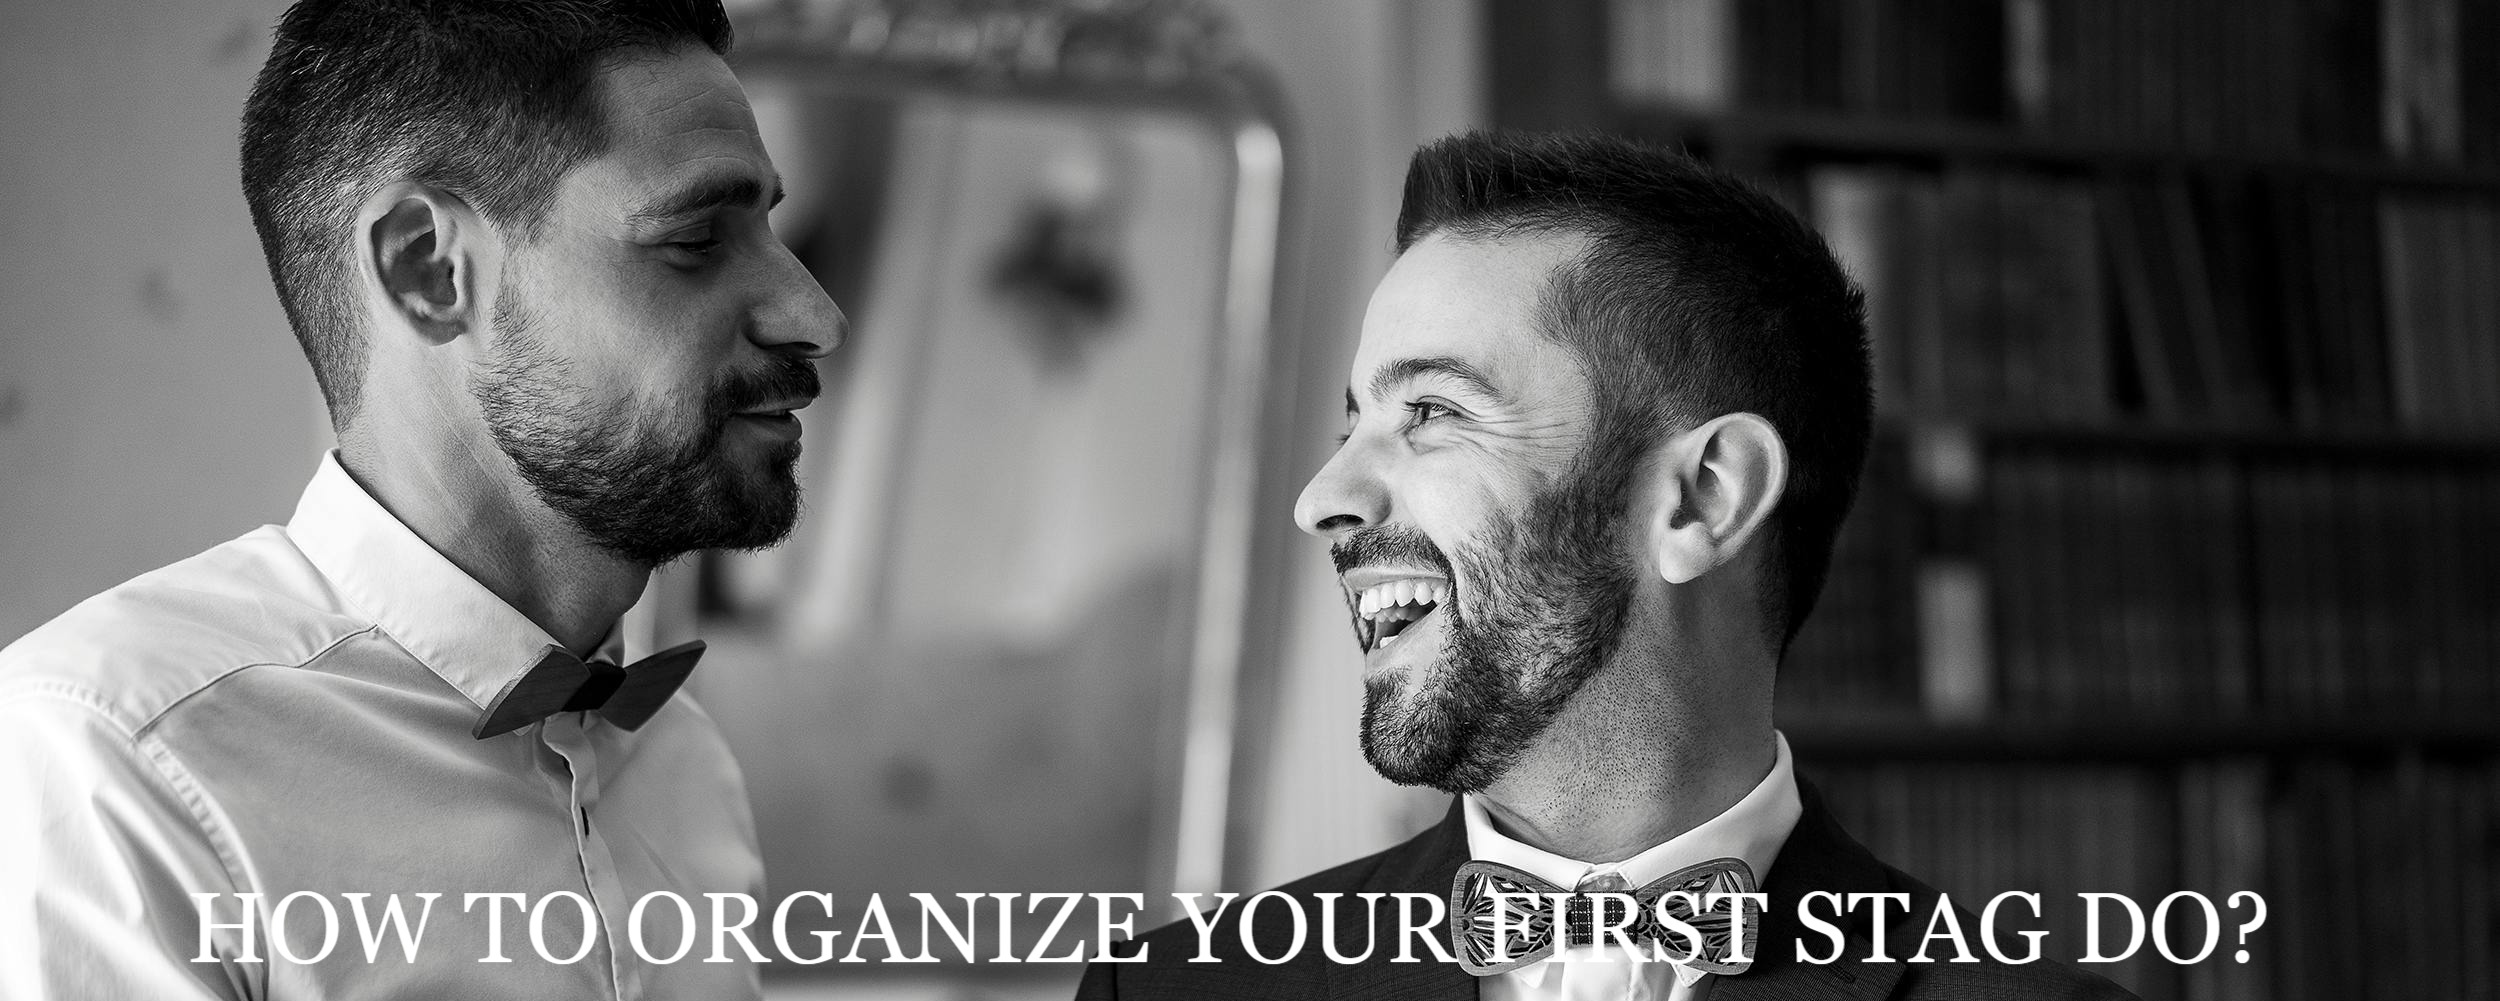 How to organize your first stag do 